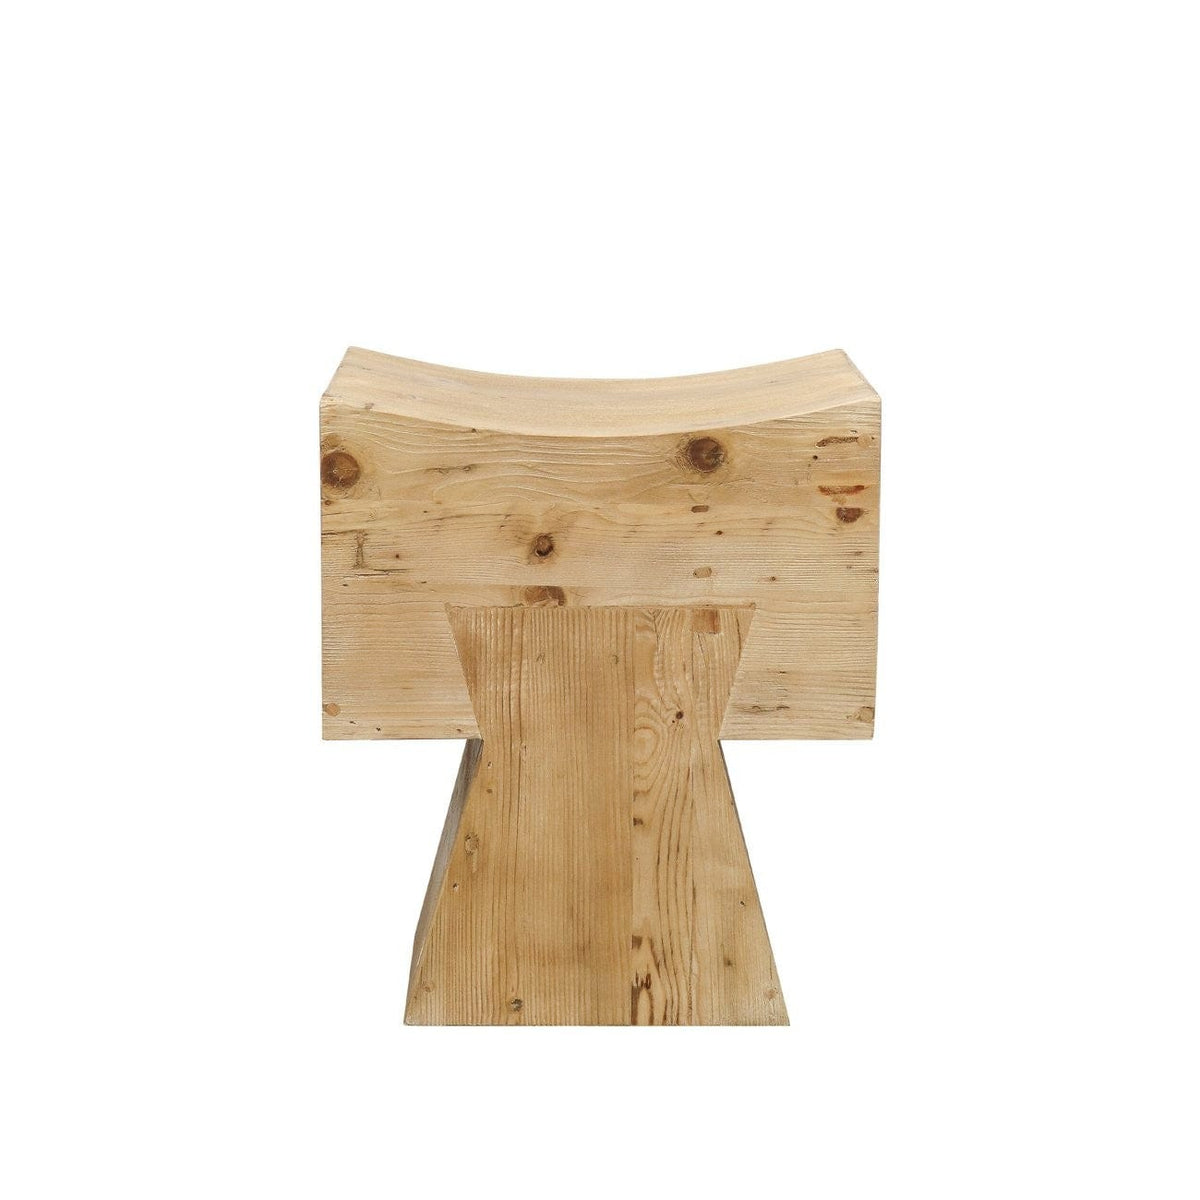 Hughes Wooden Side Table